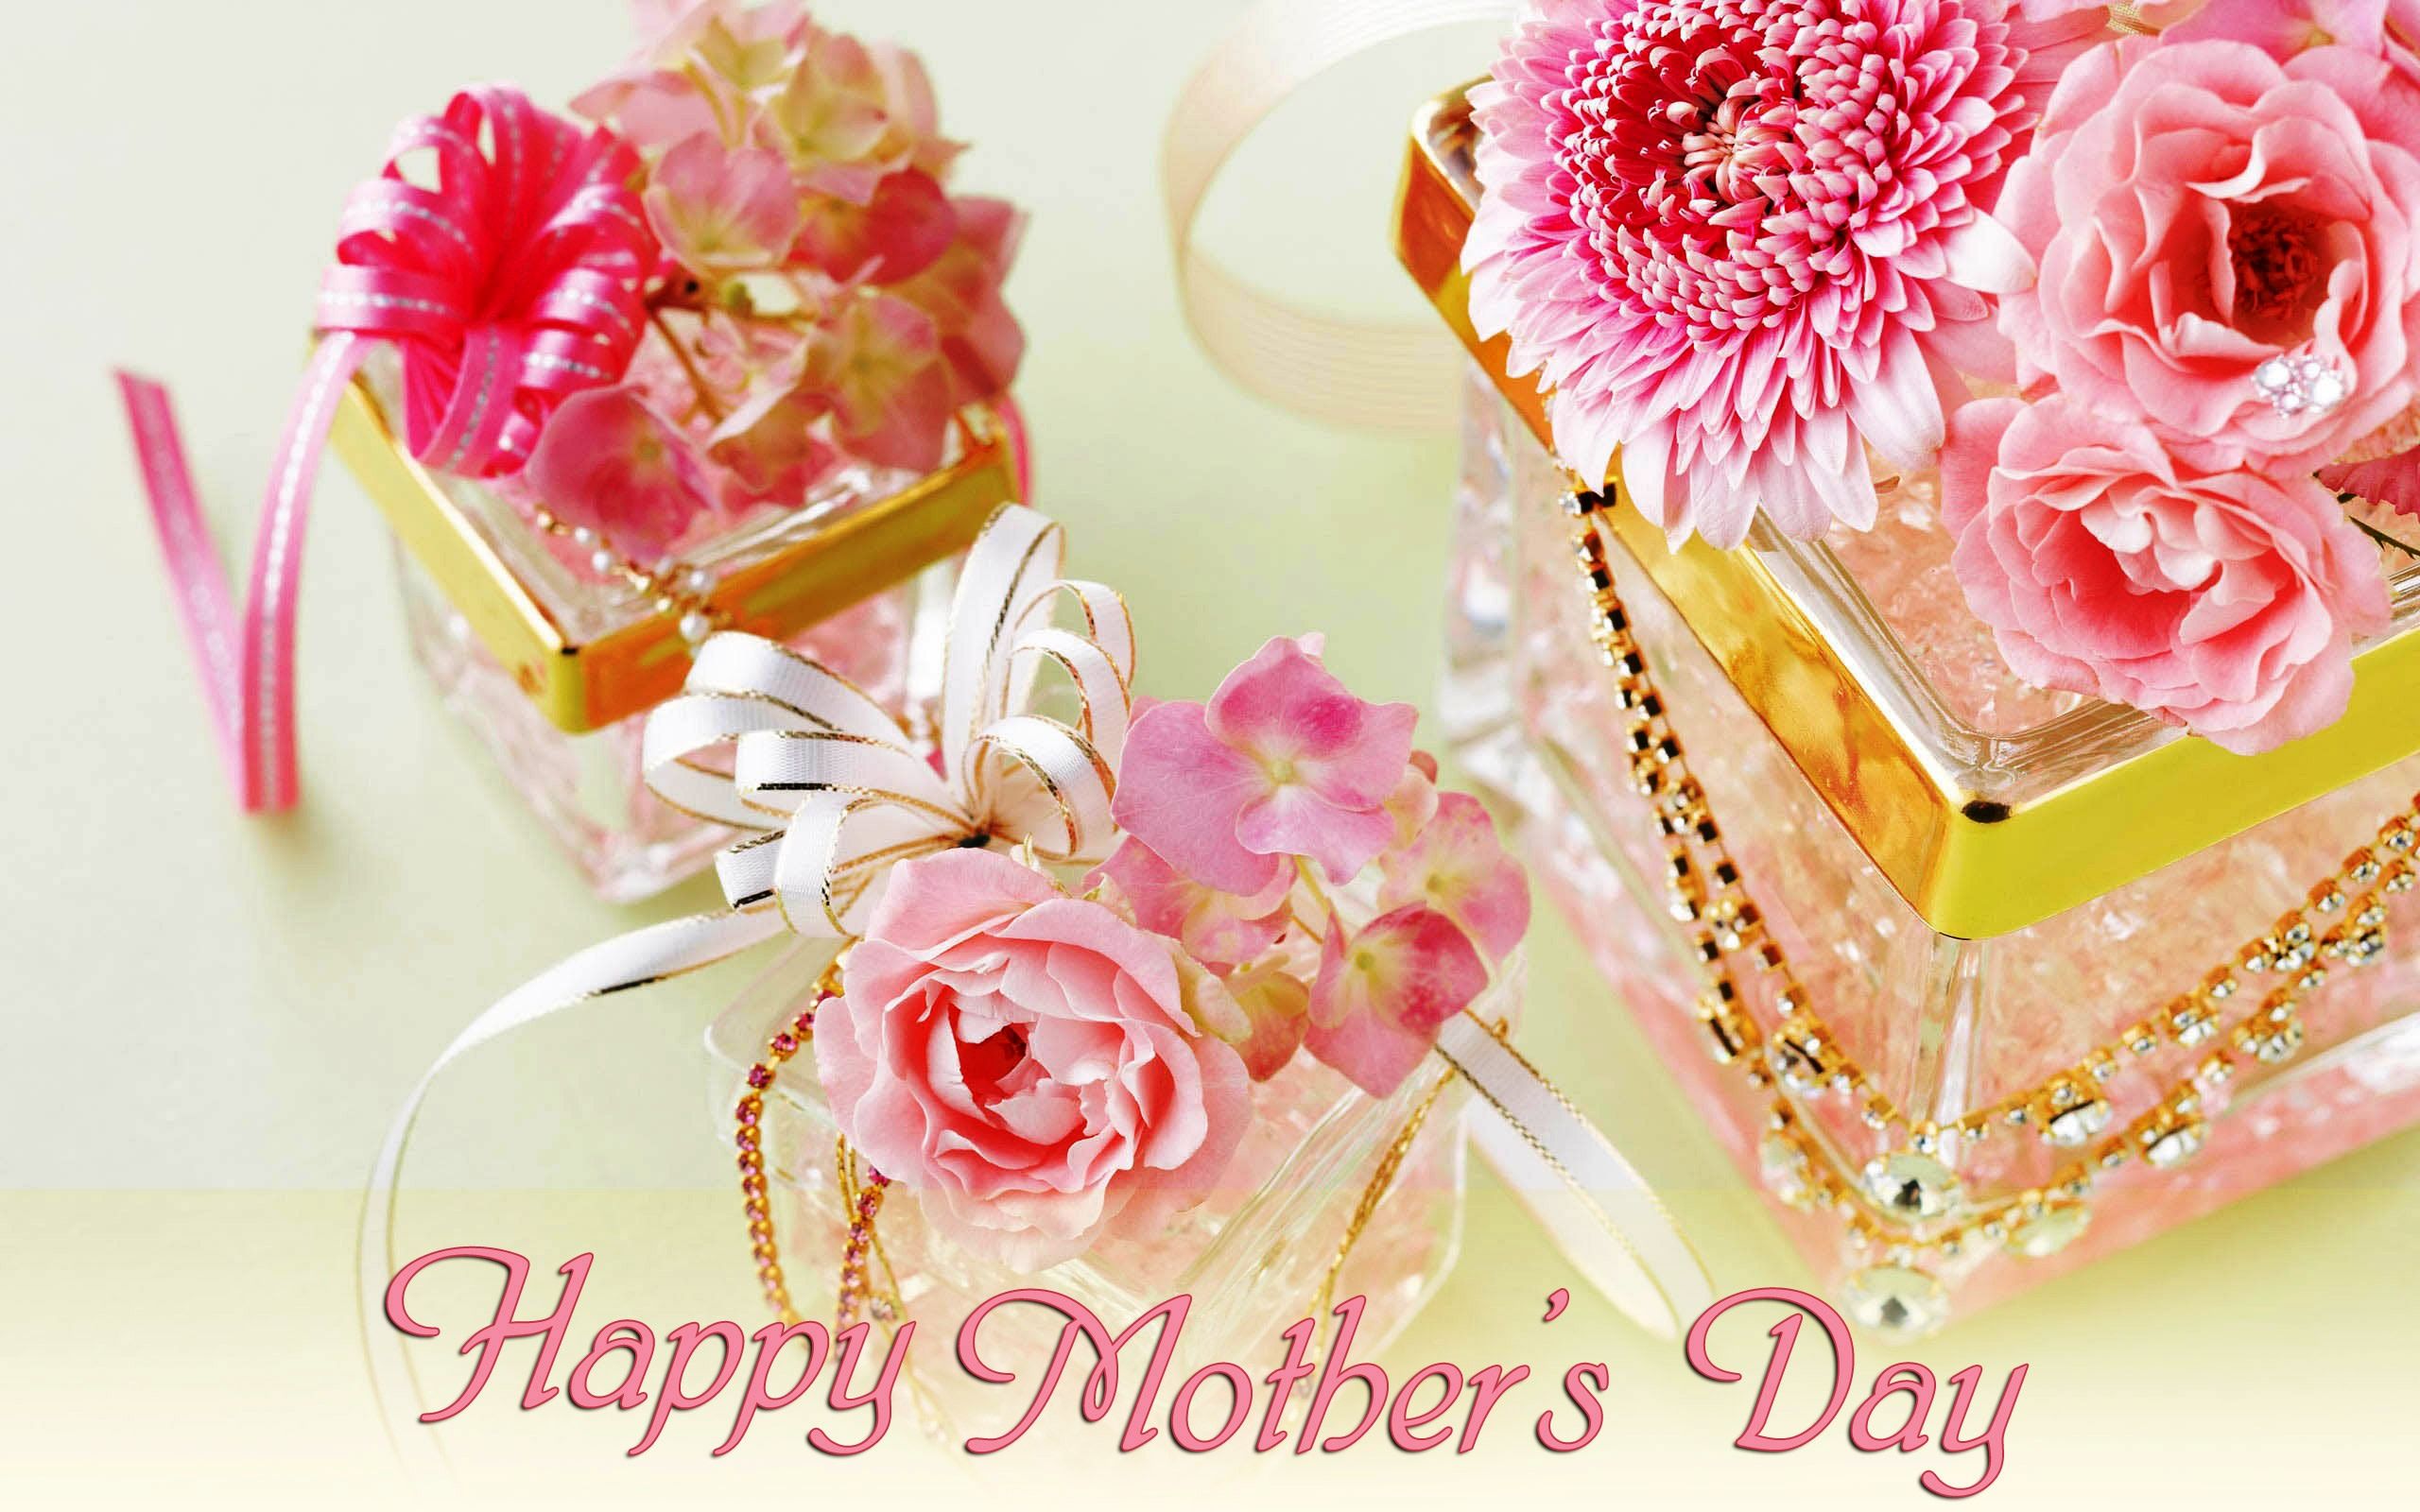 HD wallpaper, Flowers, Day, Happy, Mothers